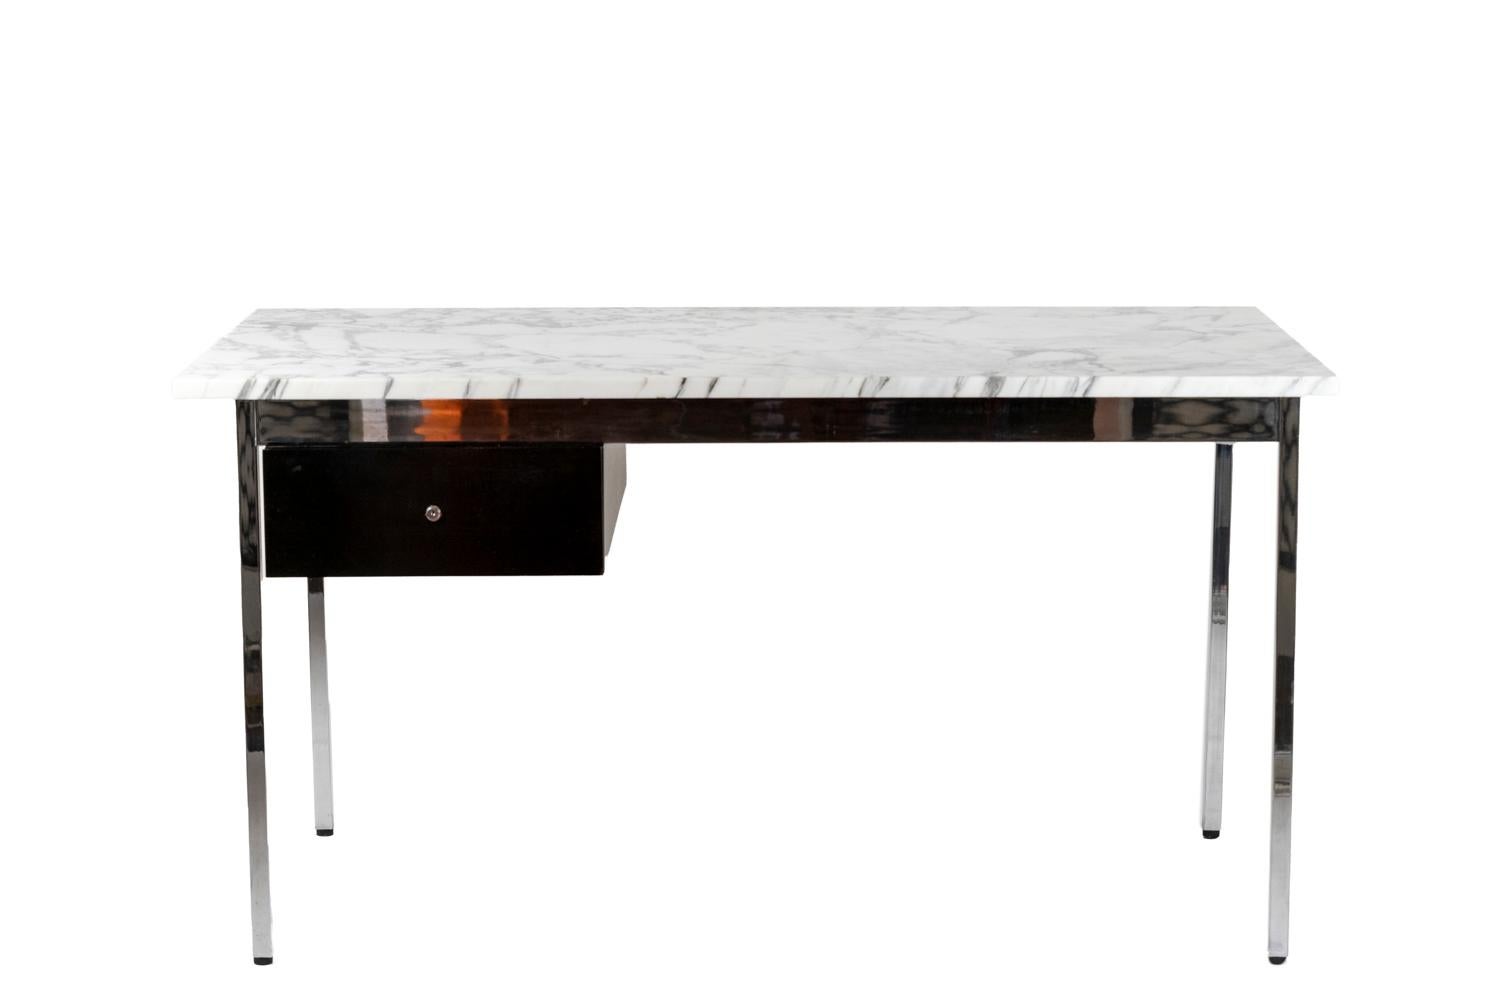 Franco Albini, attributed to.
Knoll, edited by.

Pedestal desk opening with two drawers. Chromed metal base, white marble top.

Work realized in the 1970s.